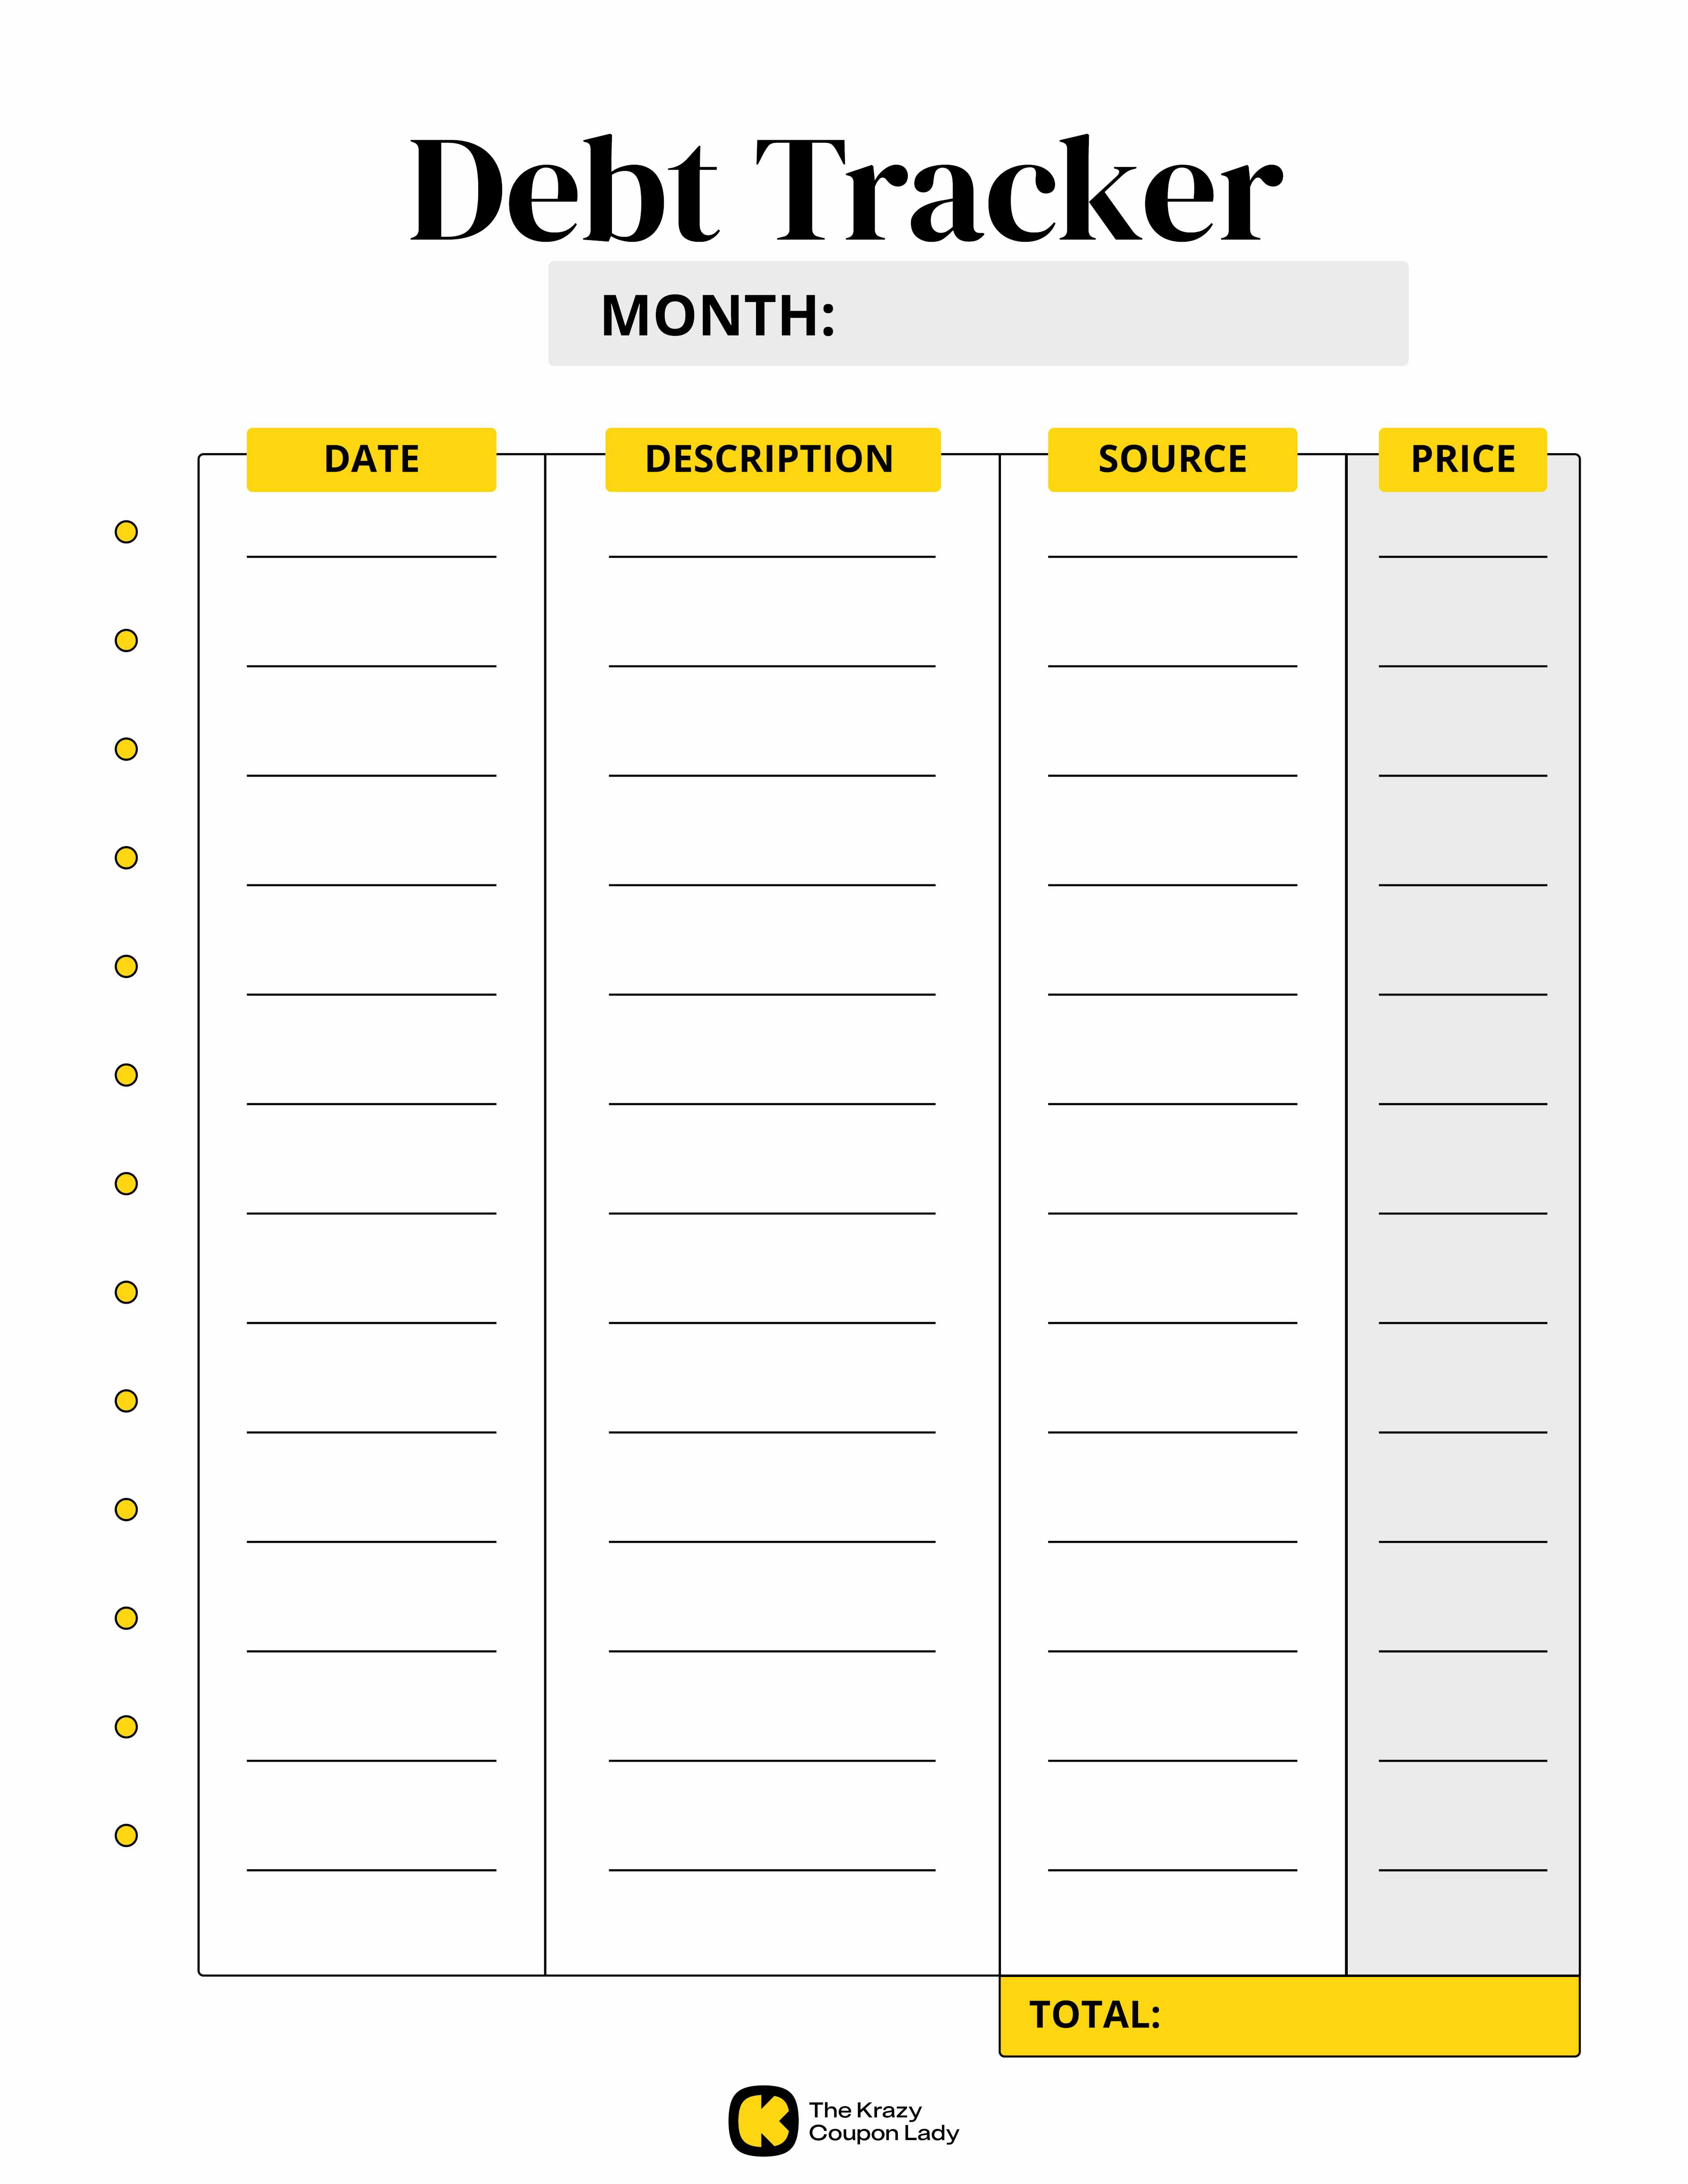 a monthly debt tracker from KCL